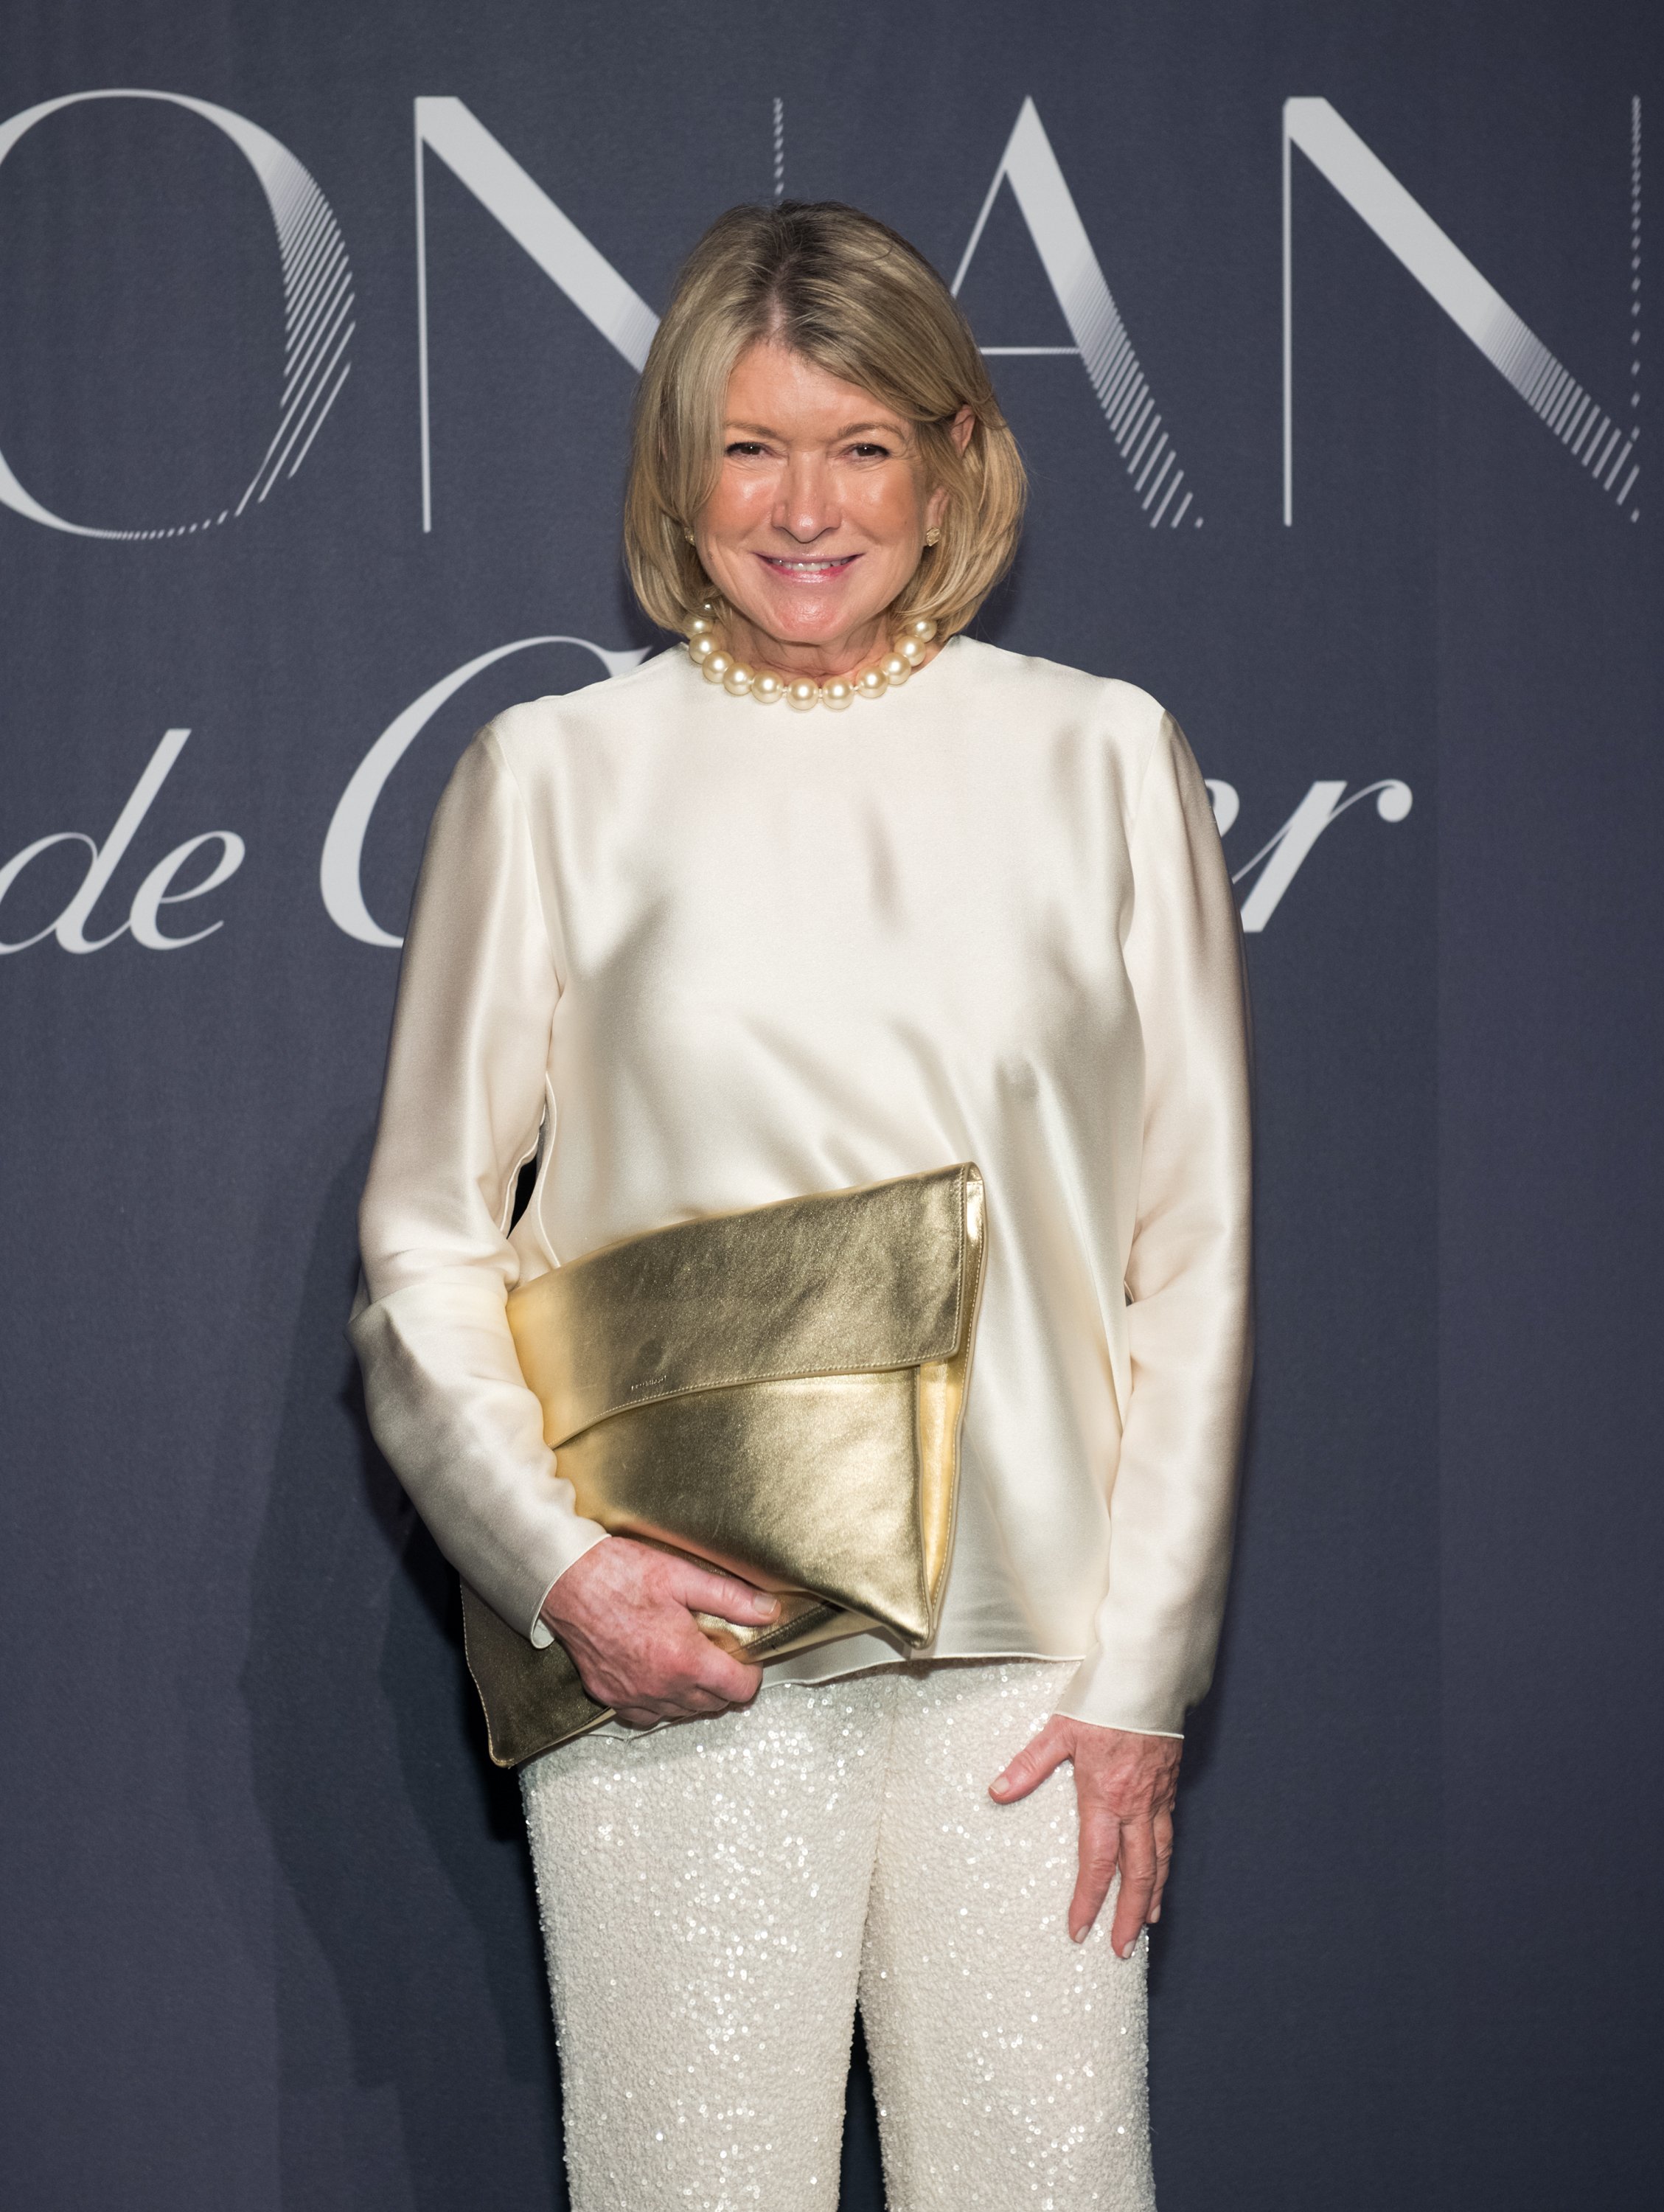 Martha Stewart during a 2017 exhibit in New York City. | Photo: Getty Images